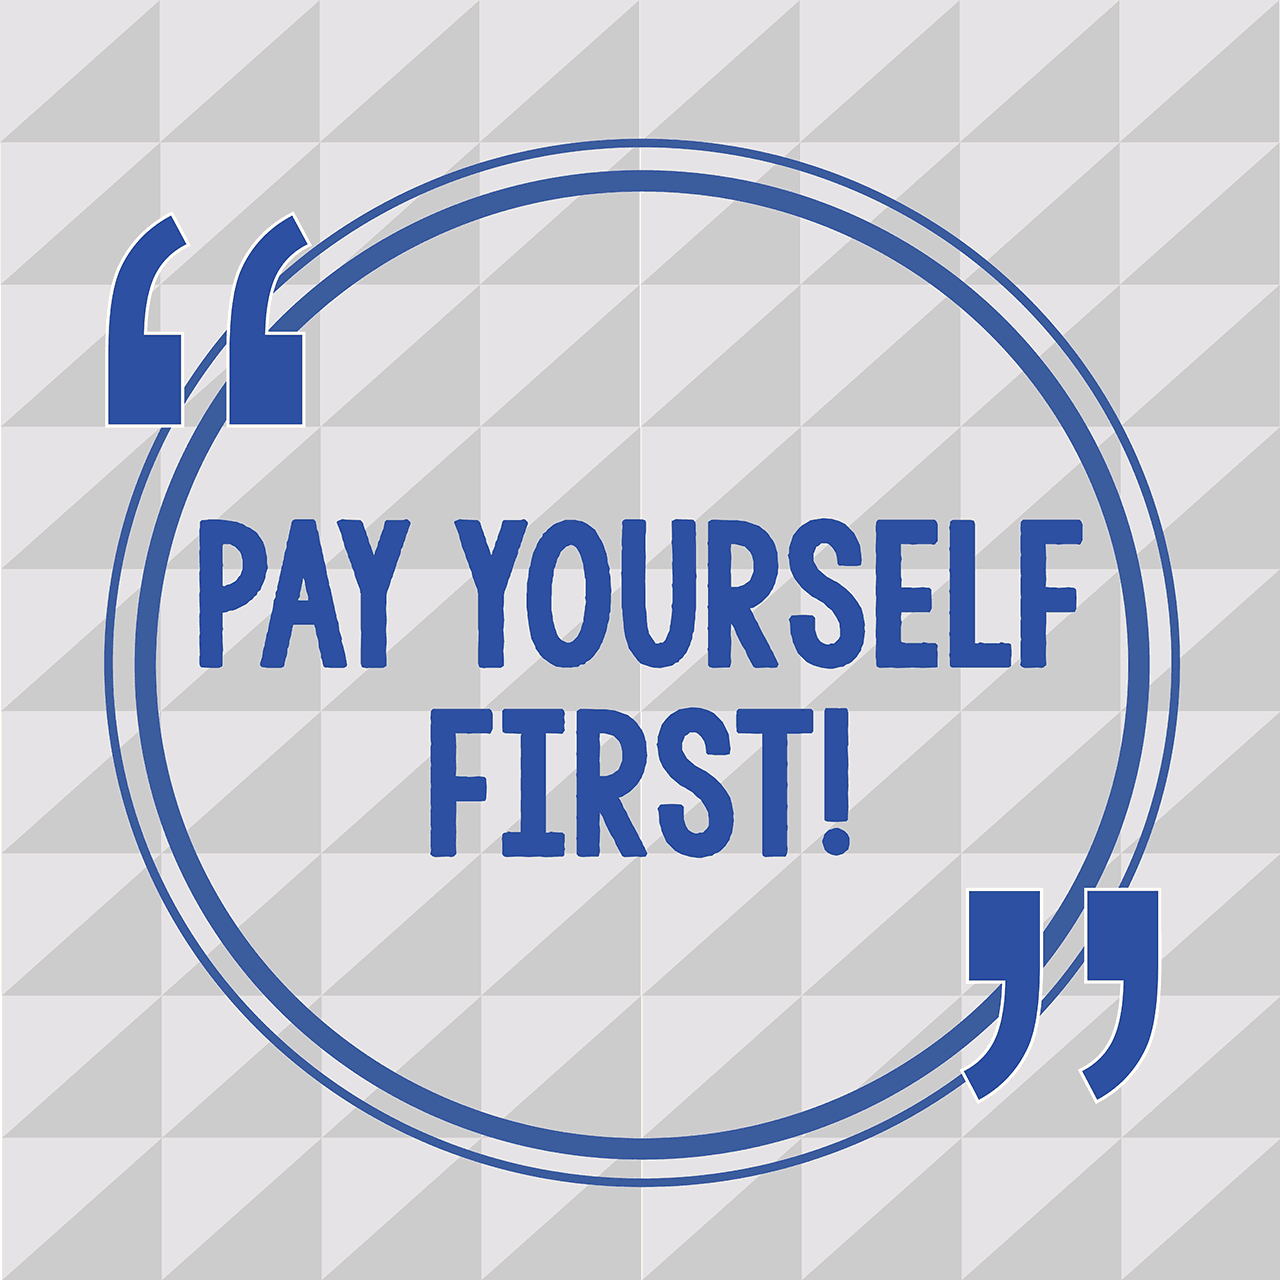 Private Practice Professionals: Pay Yourself First!